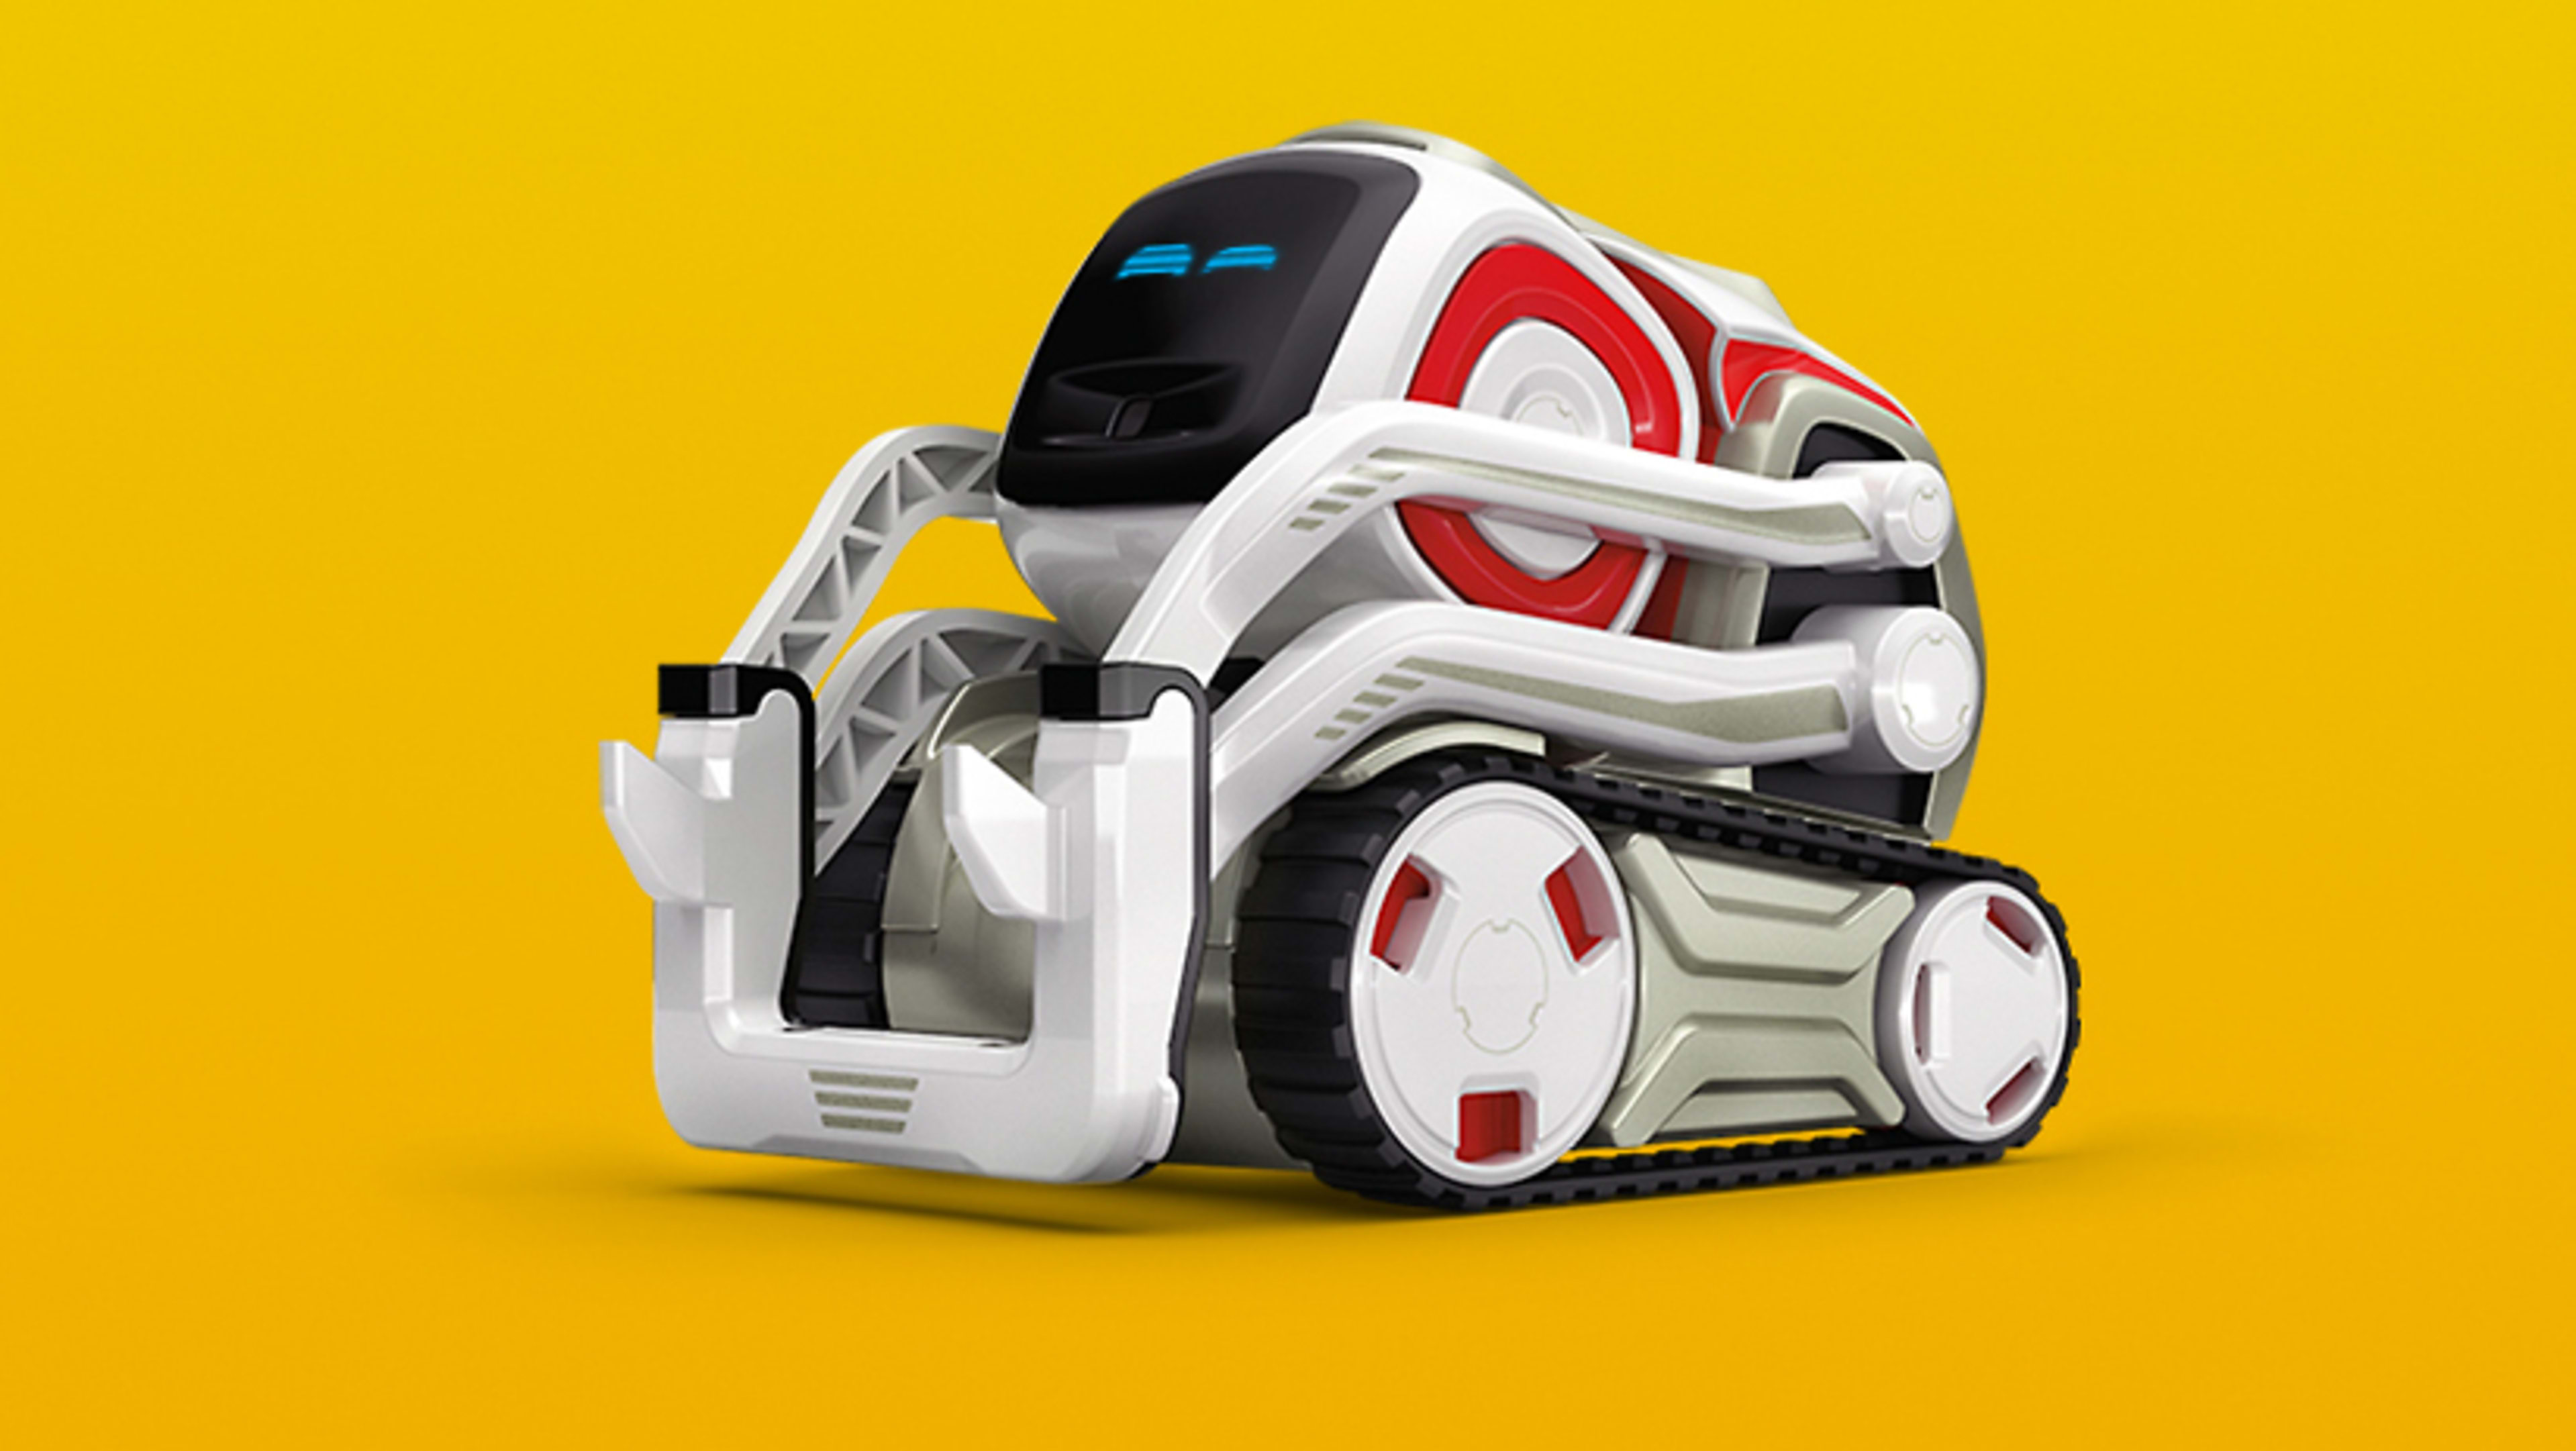 Anki Wants To Use Its Toy Robot To Hook In Kid Coders